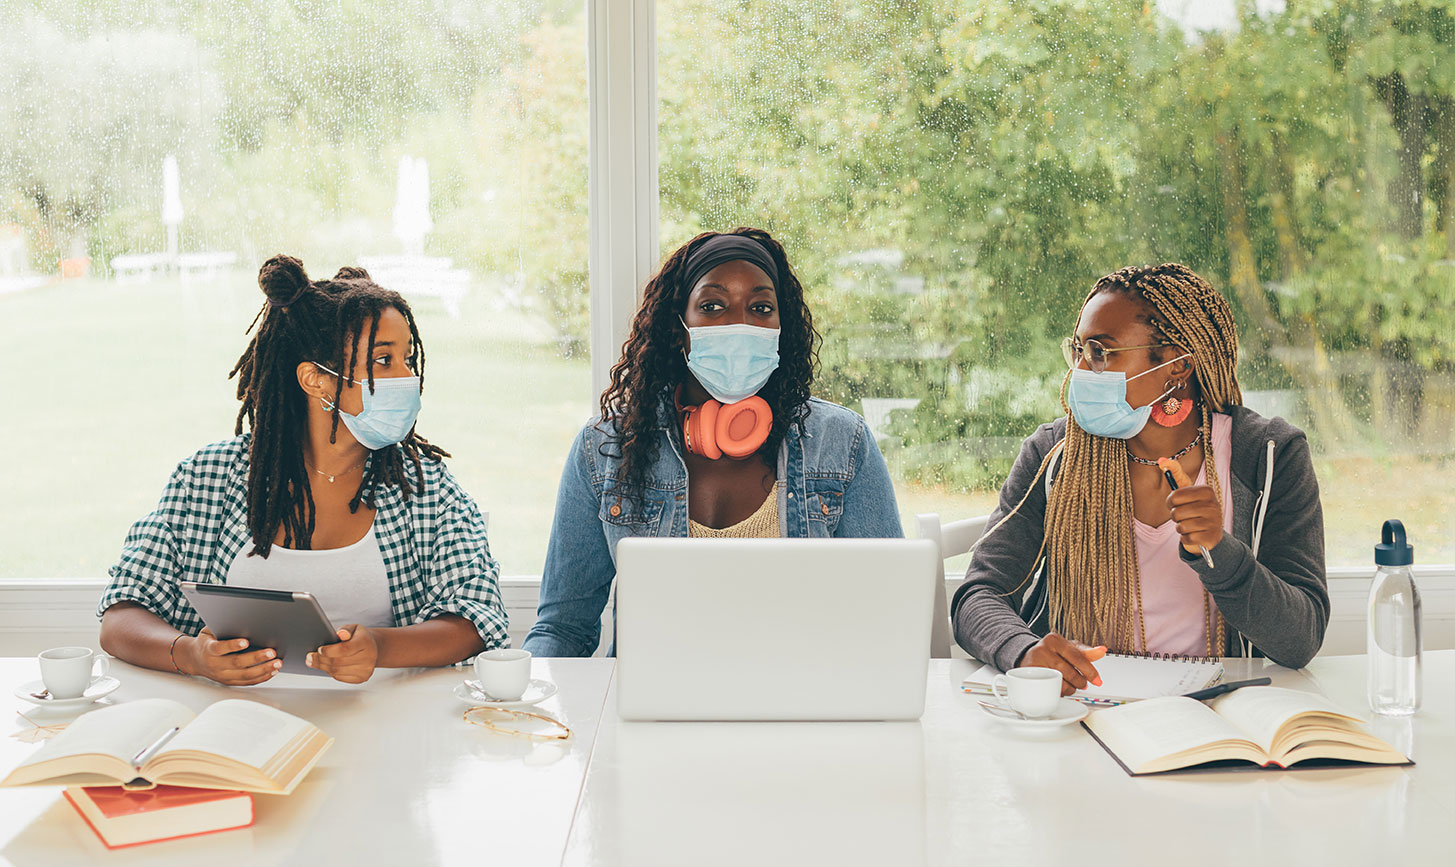 students-with-masks-working-together-sitting.jpg